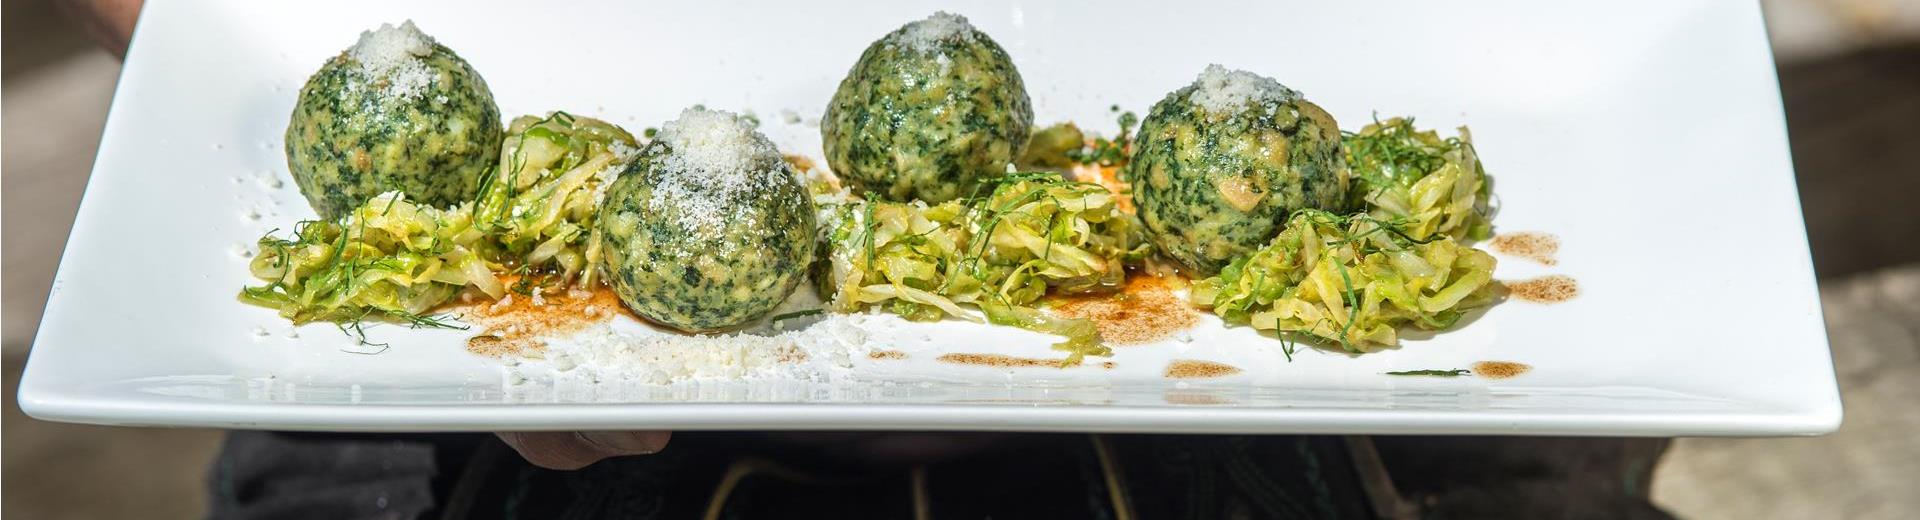 Typical south tyrolean dumplings with spinach